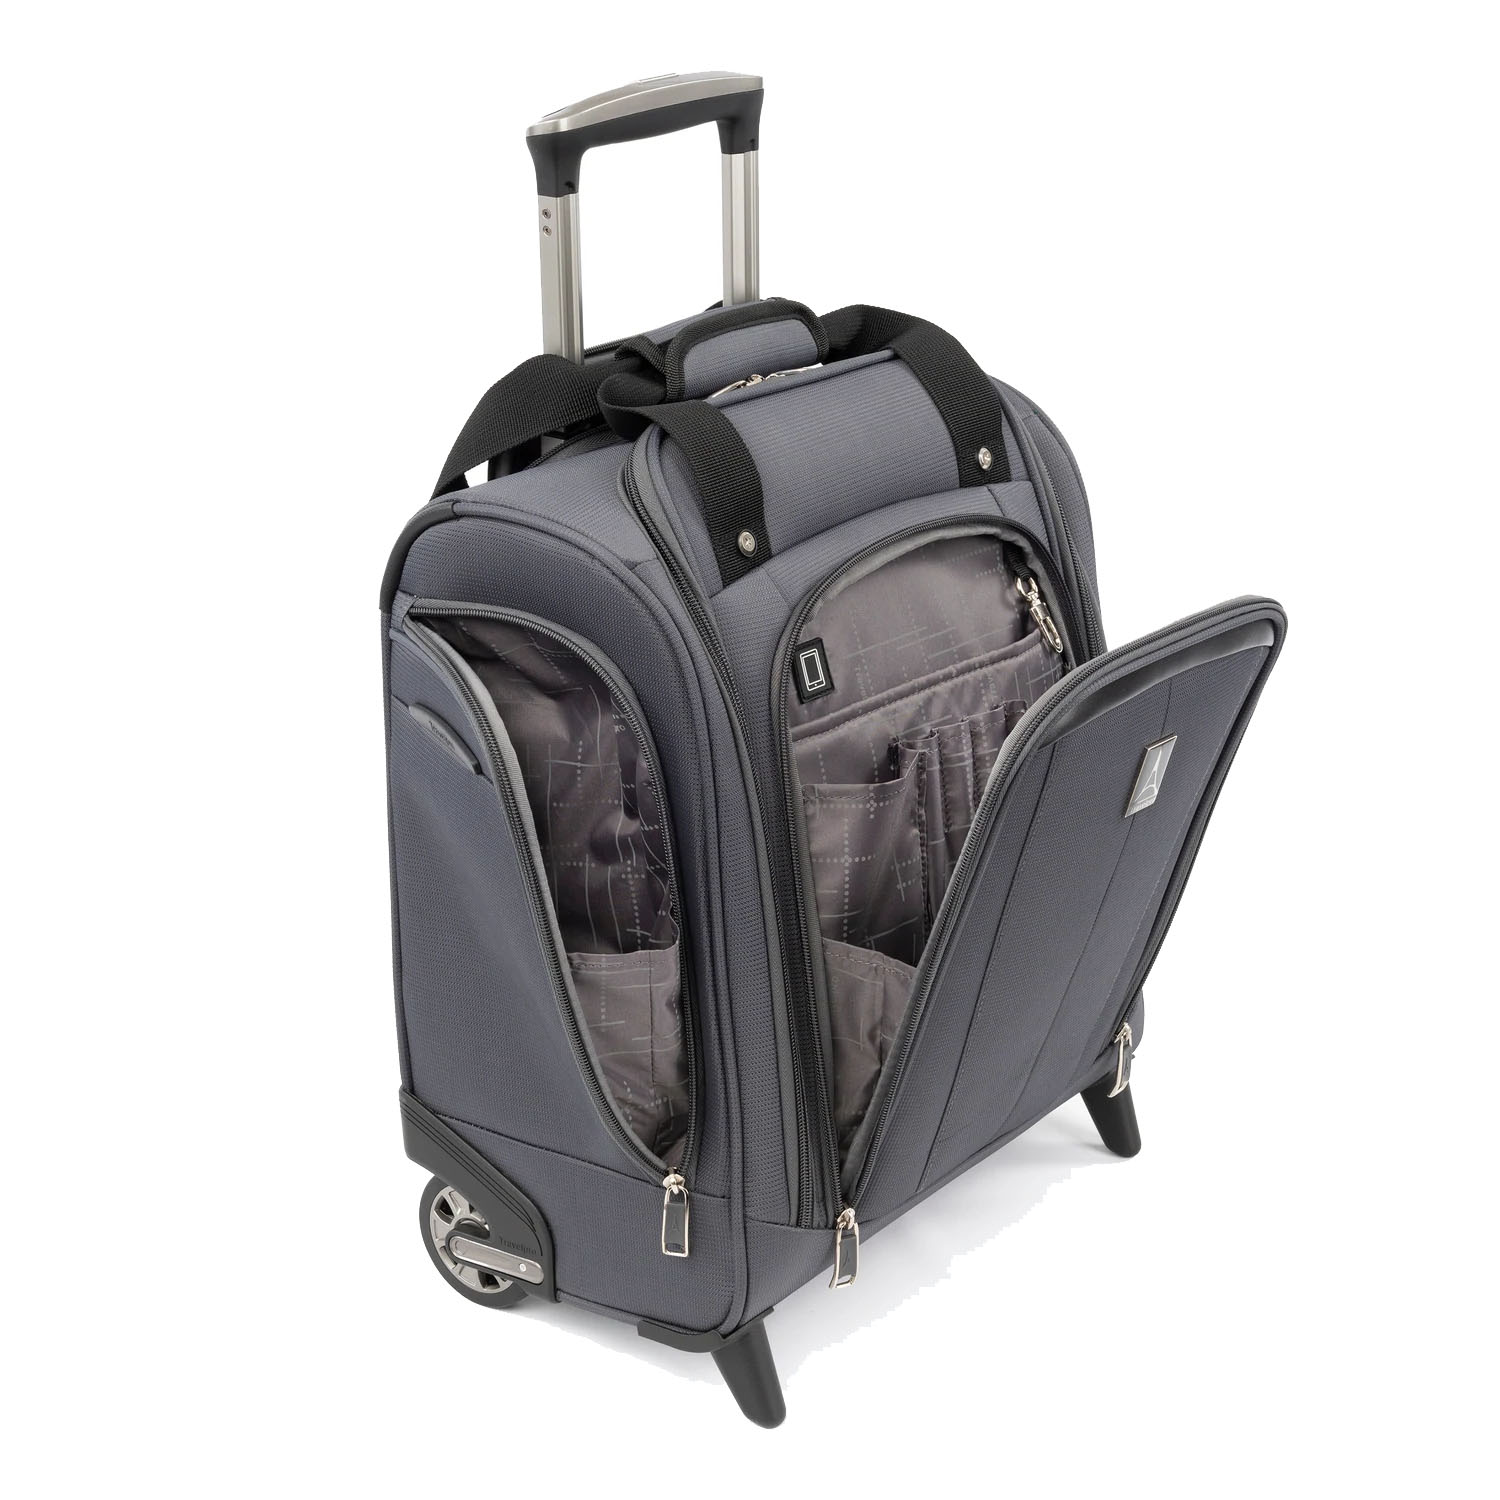 Travelpro Autopilot 2.0 Rolling Underseat Carry On  Brands,Travelpro,Carry  on Luggage,Wheeled Totes,Lightweight Luggage,Autopilot 2.0 - 118.95